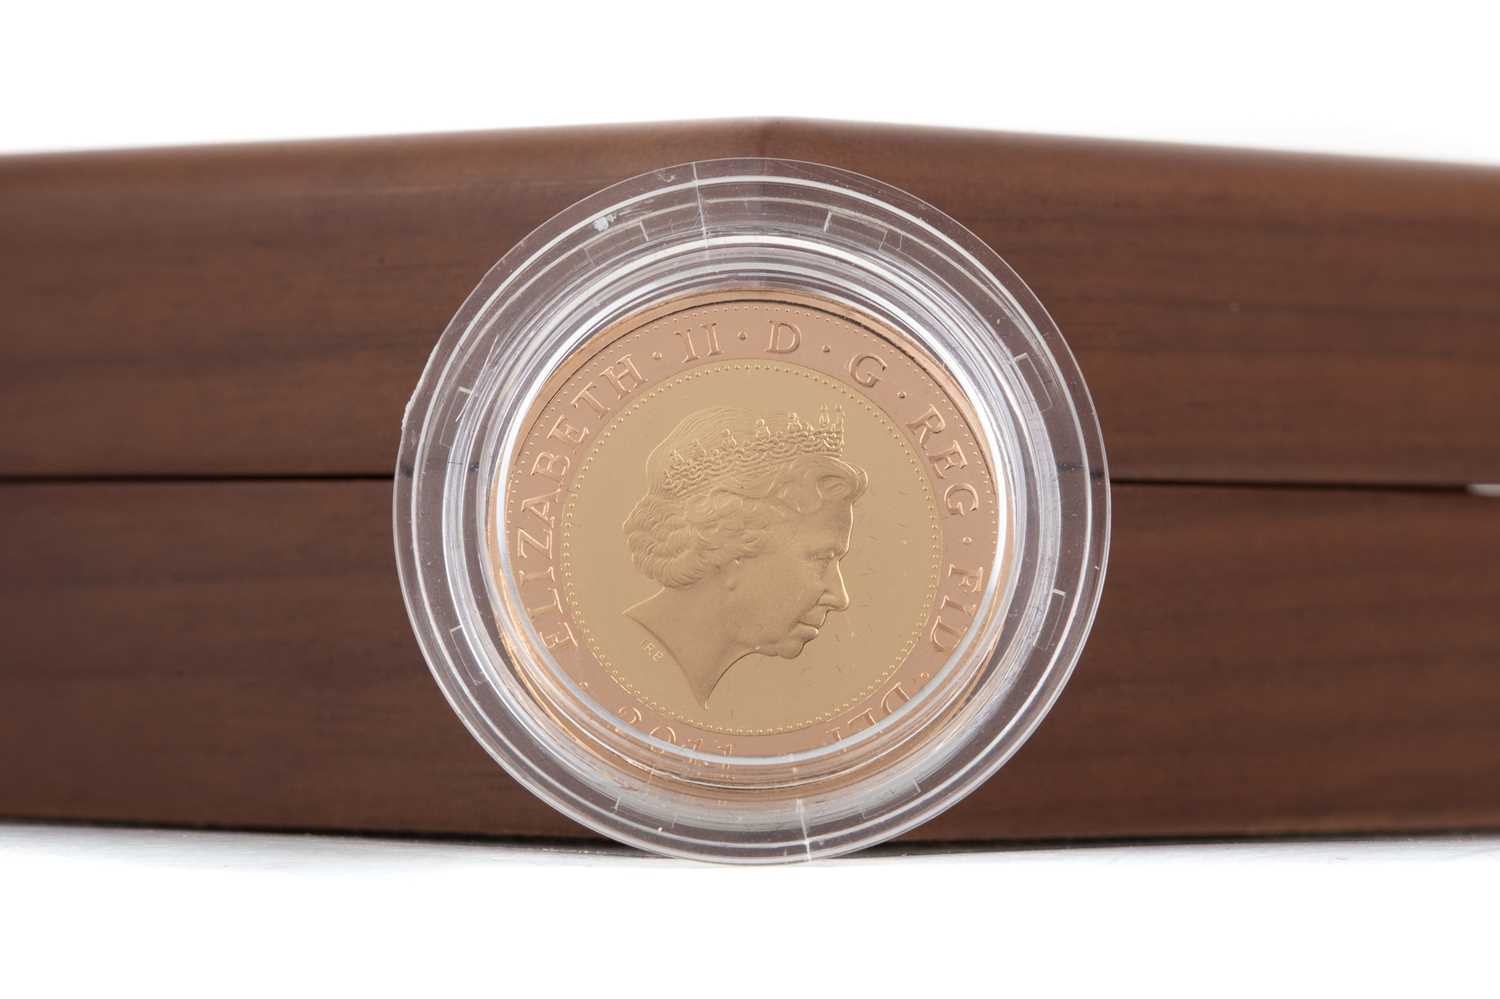 THE 2011 MARY ROSE TWO POUND GOLD PROOF COIN